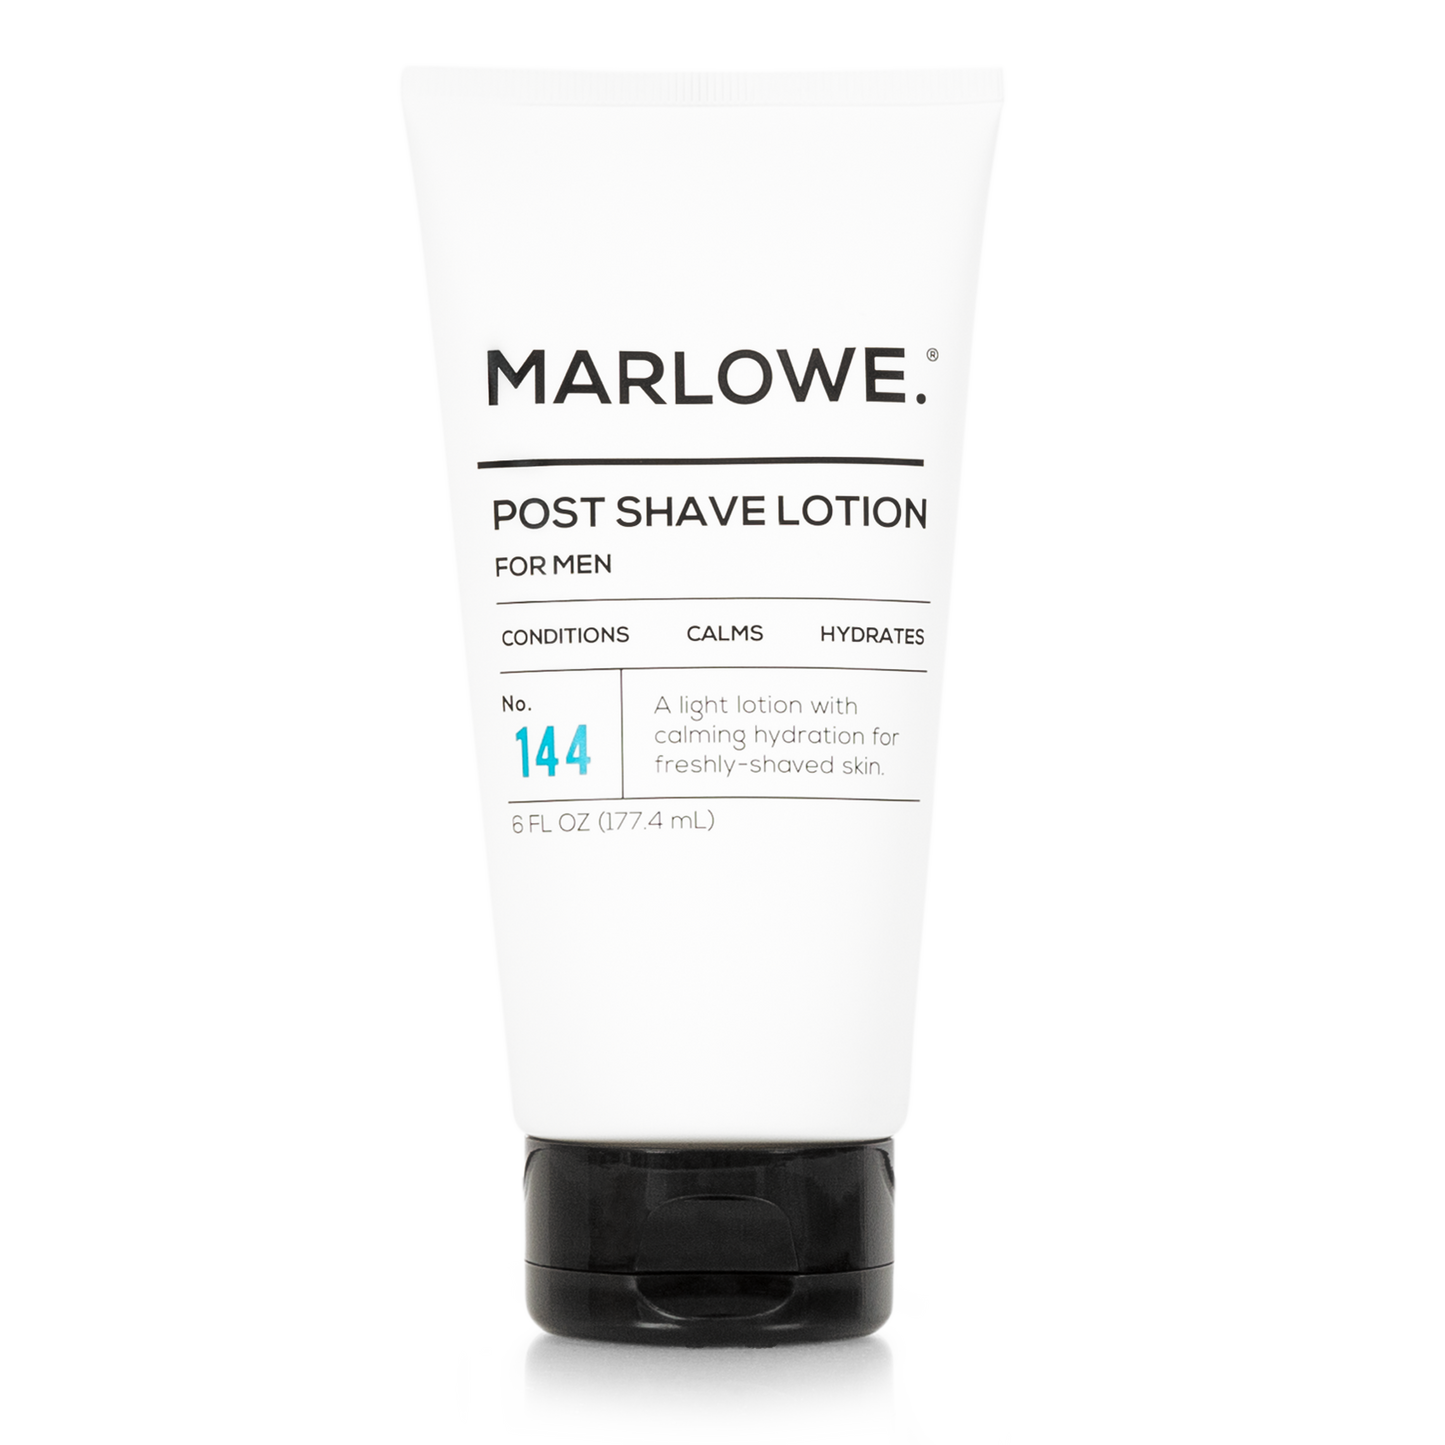 No. 144 Post Shave Lotion